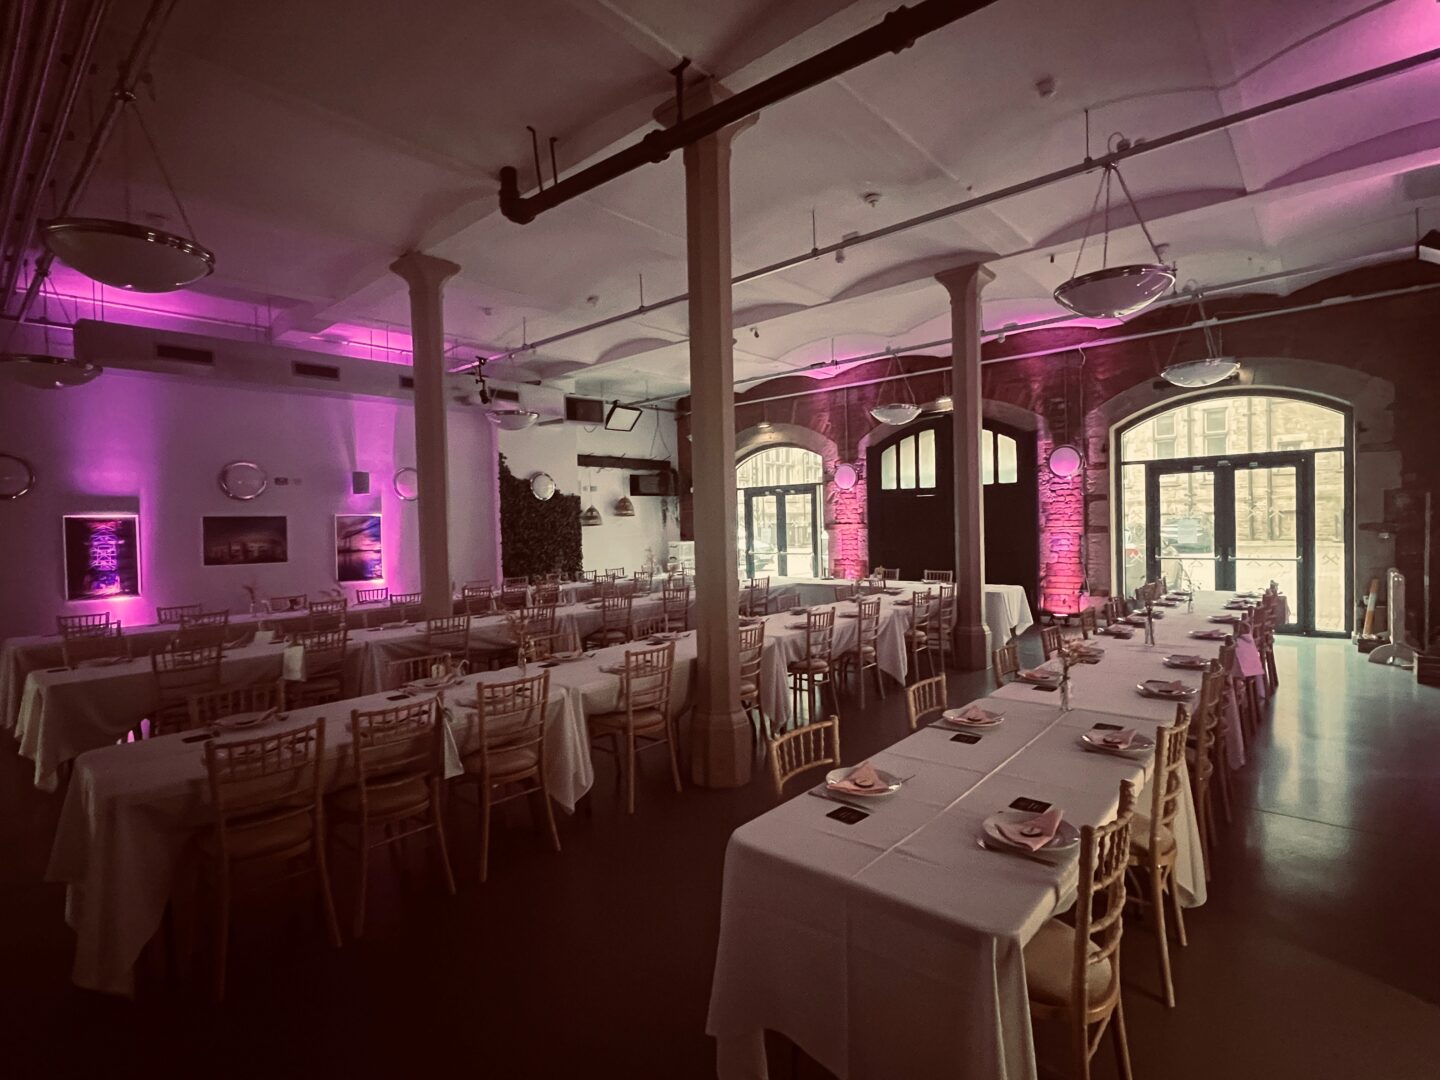 Old Fire Station dressed up for a wedding with long tables, chairs and purple lighting effects